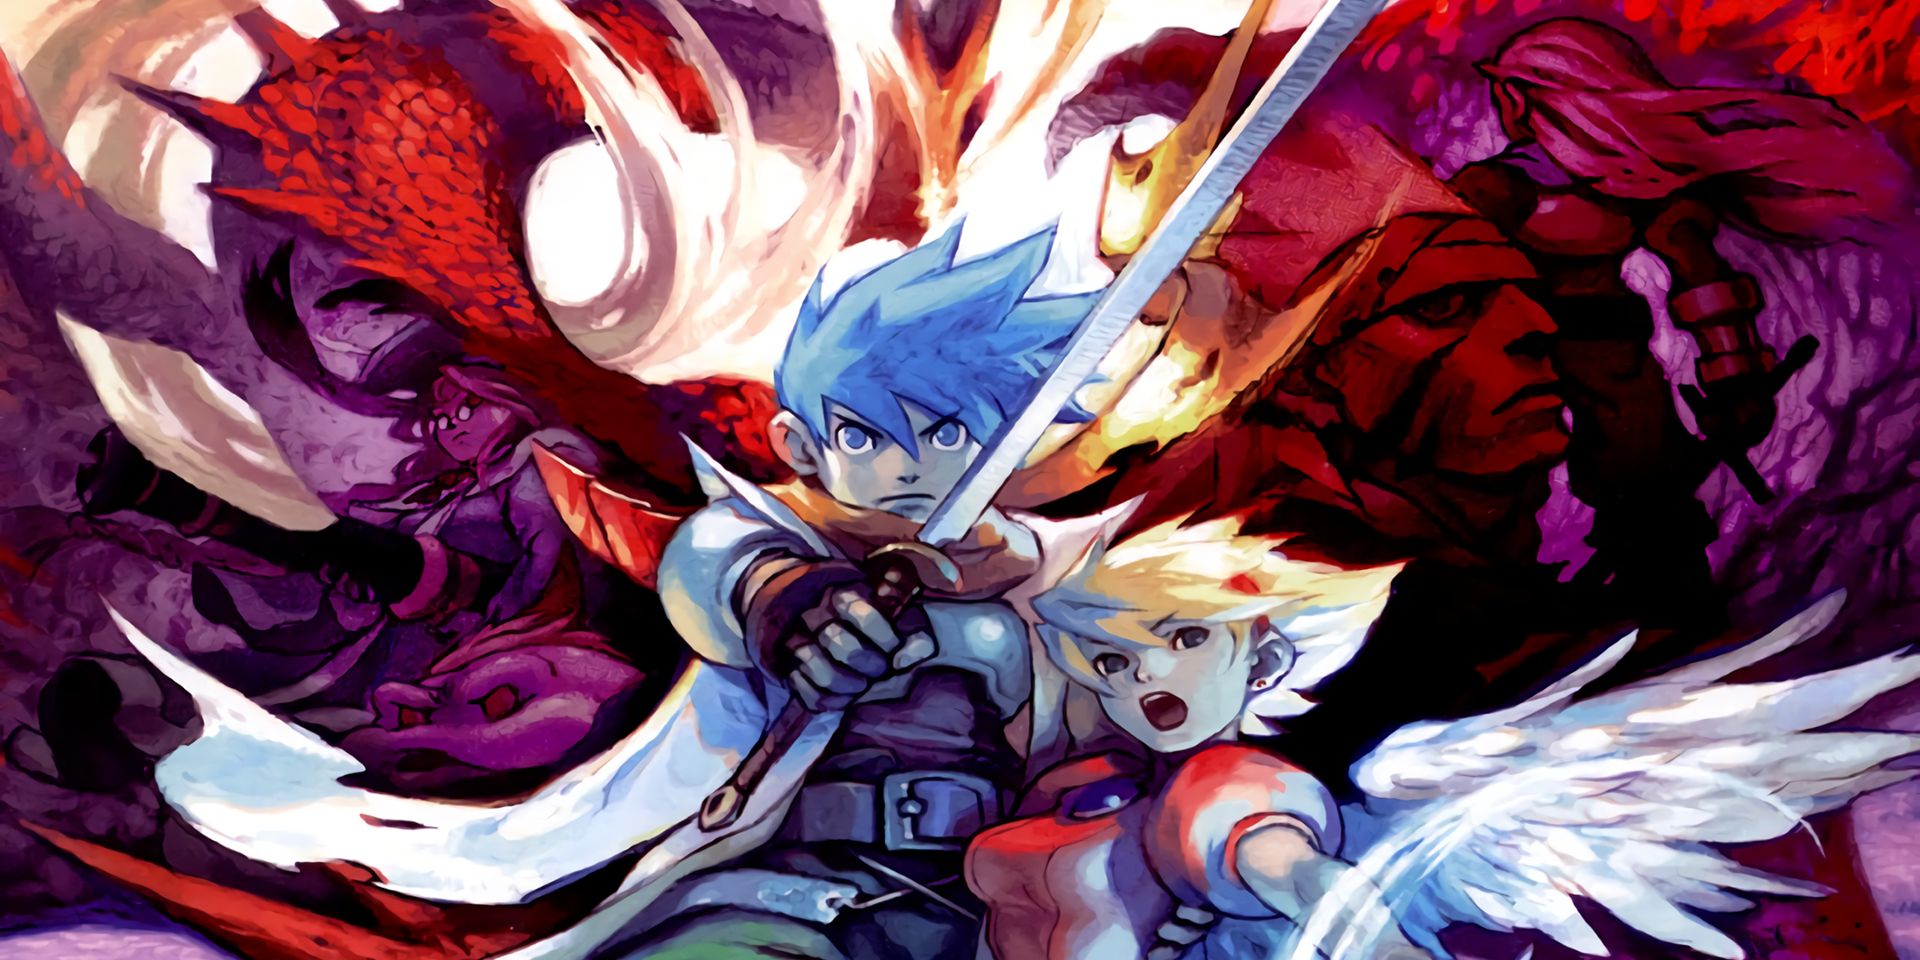 Artwork from the video game Breath of Fire 3.